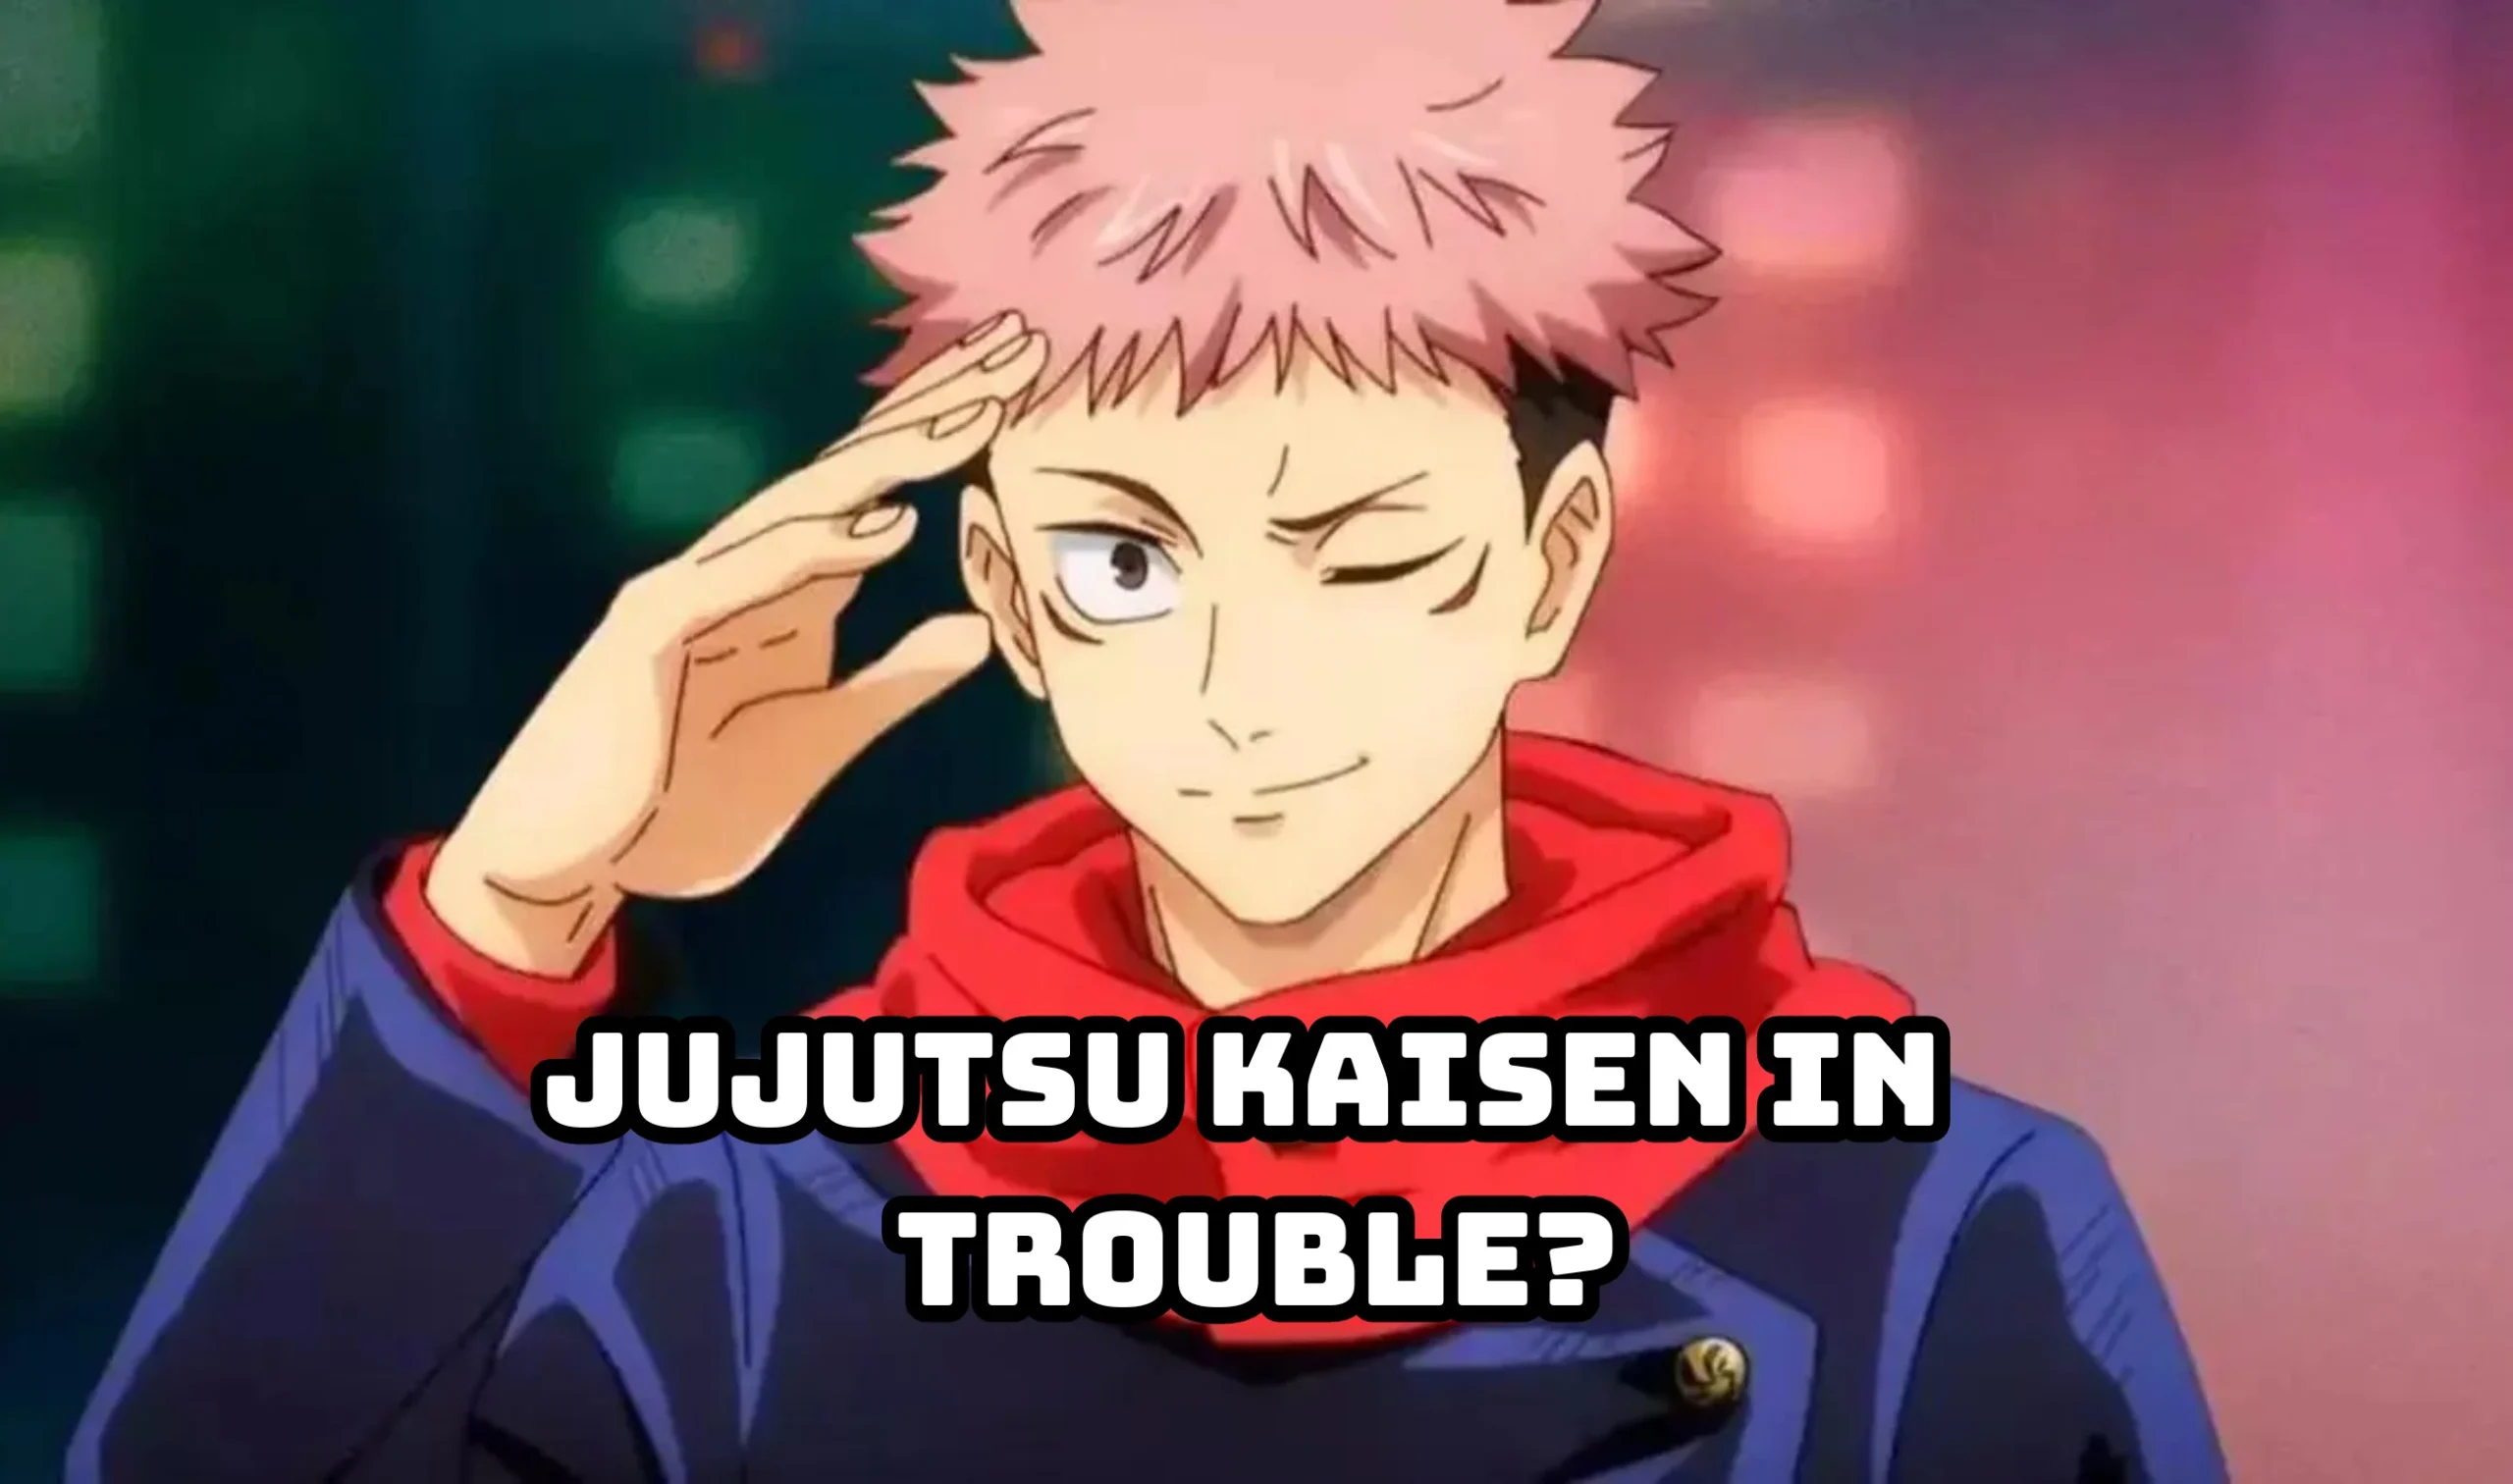 Jujutsu Kaisen in Trouble Bad News For Anime Fans